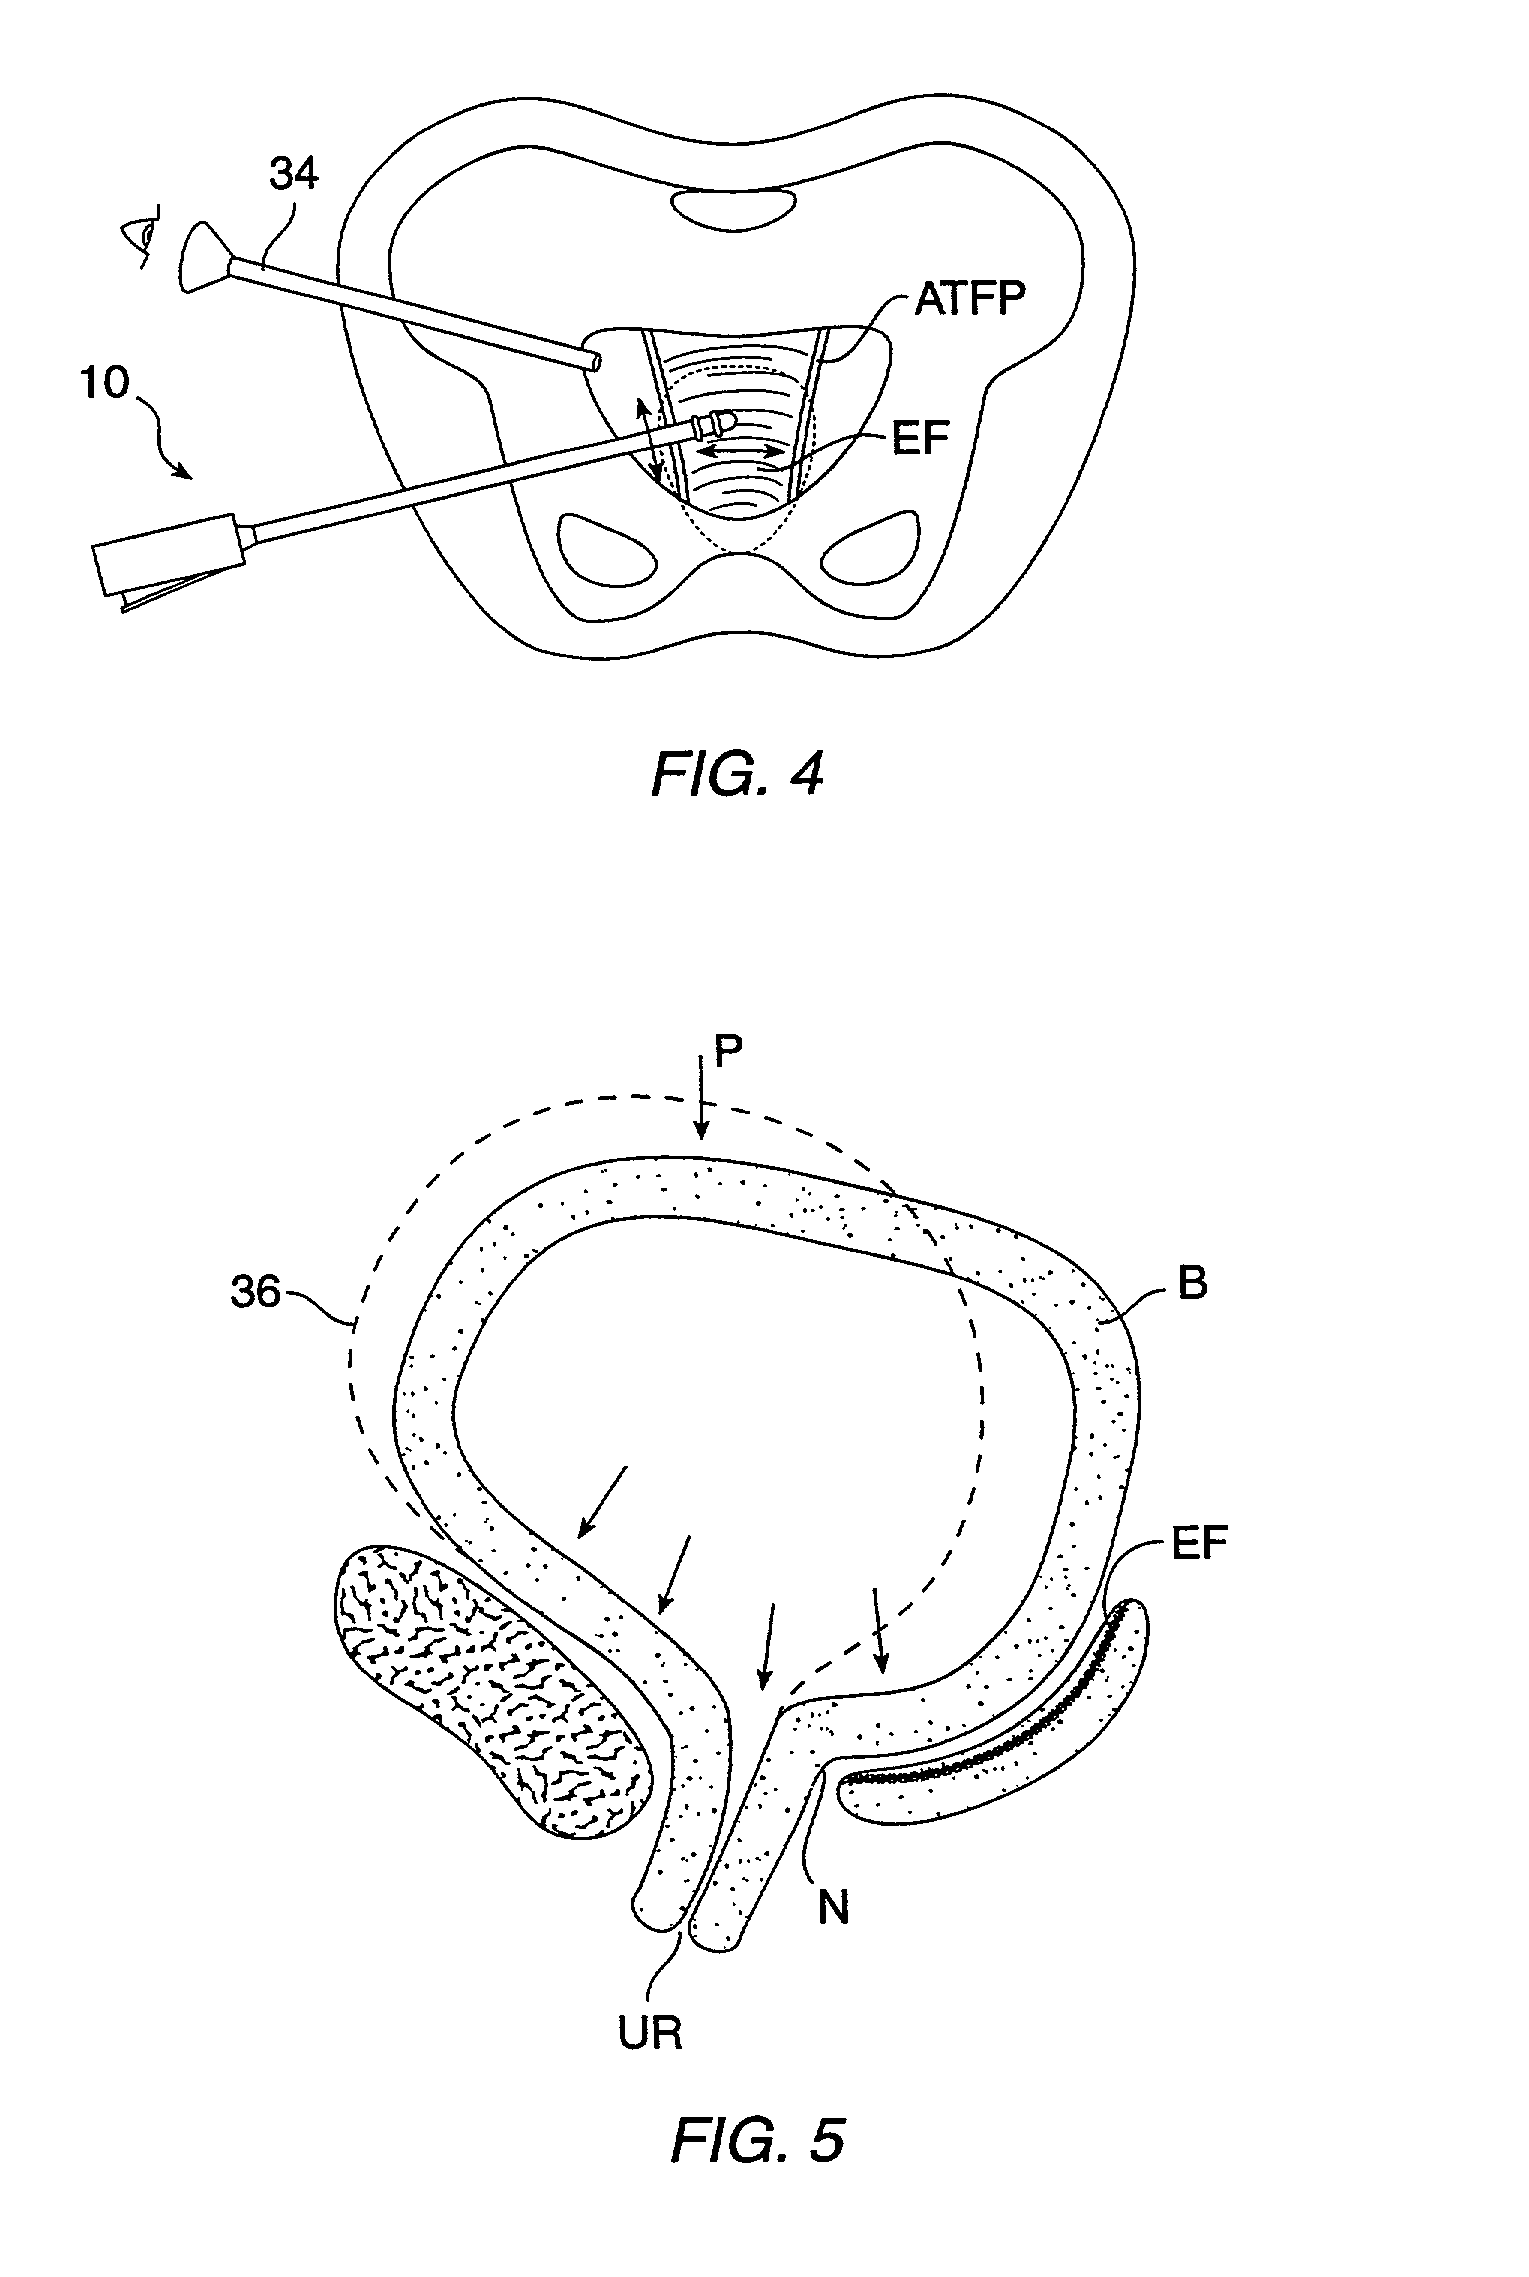 Devices, methods, and systems for shrinking tissues